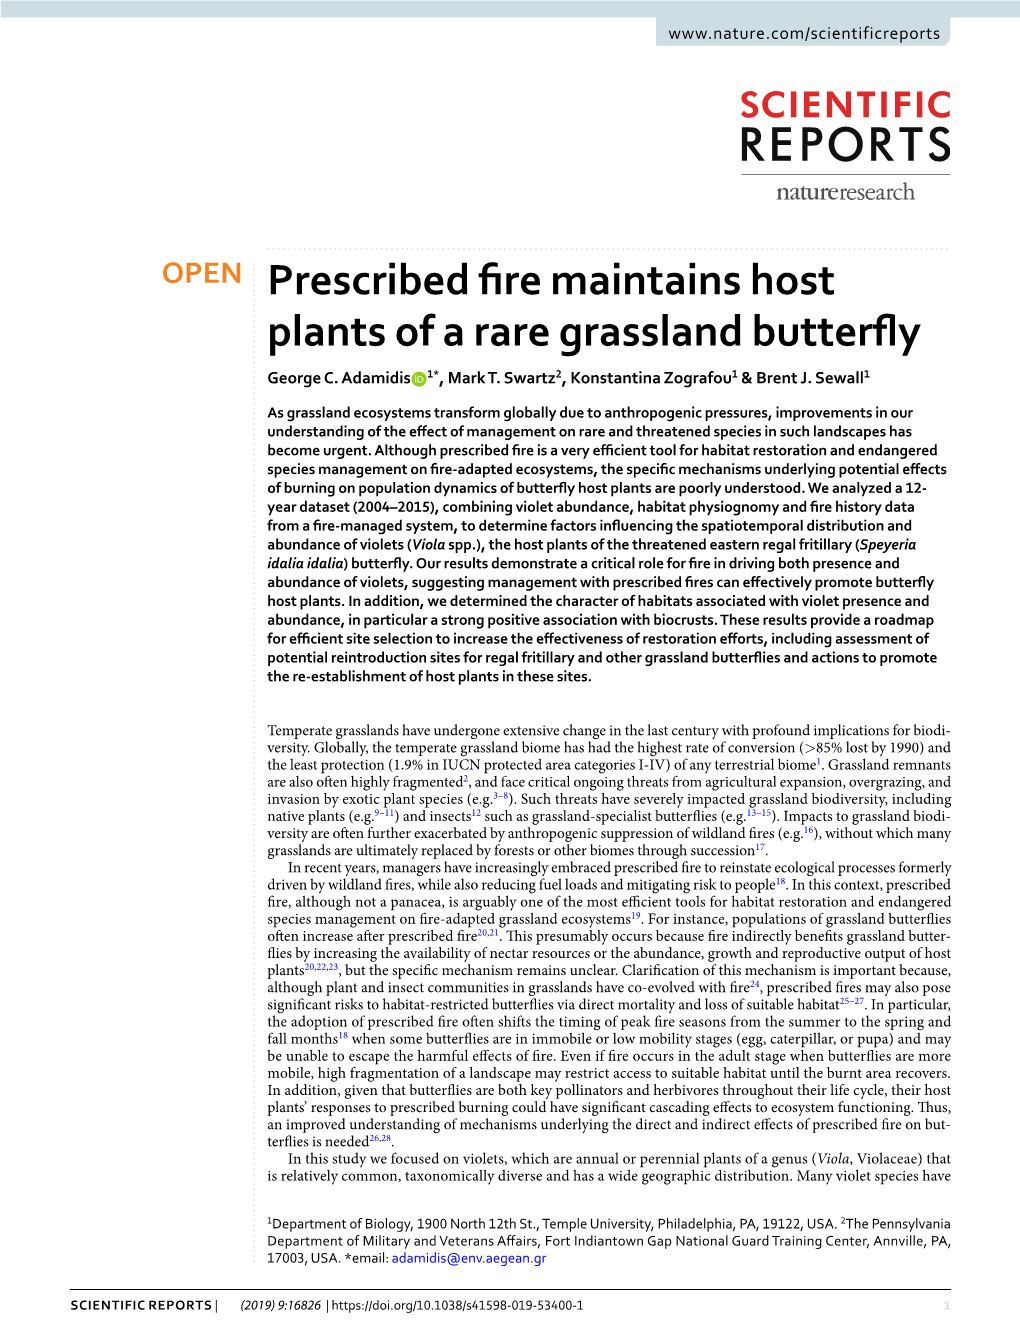 Prescribed Fire Maintains Host Plants of a Rare Grassland Butterfly